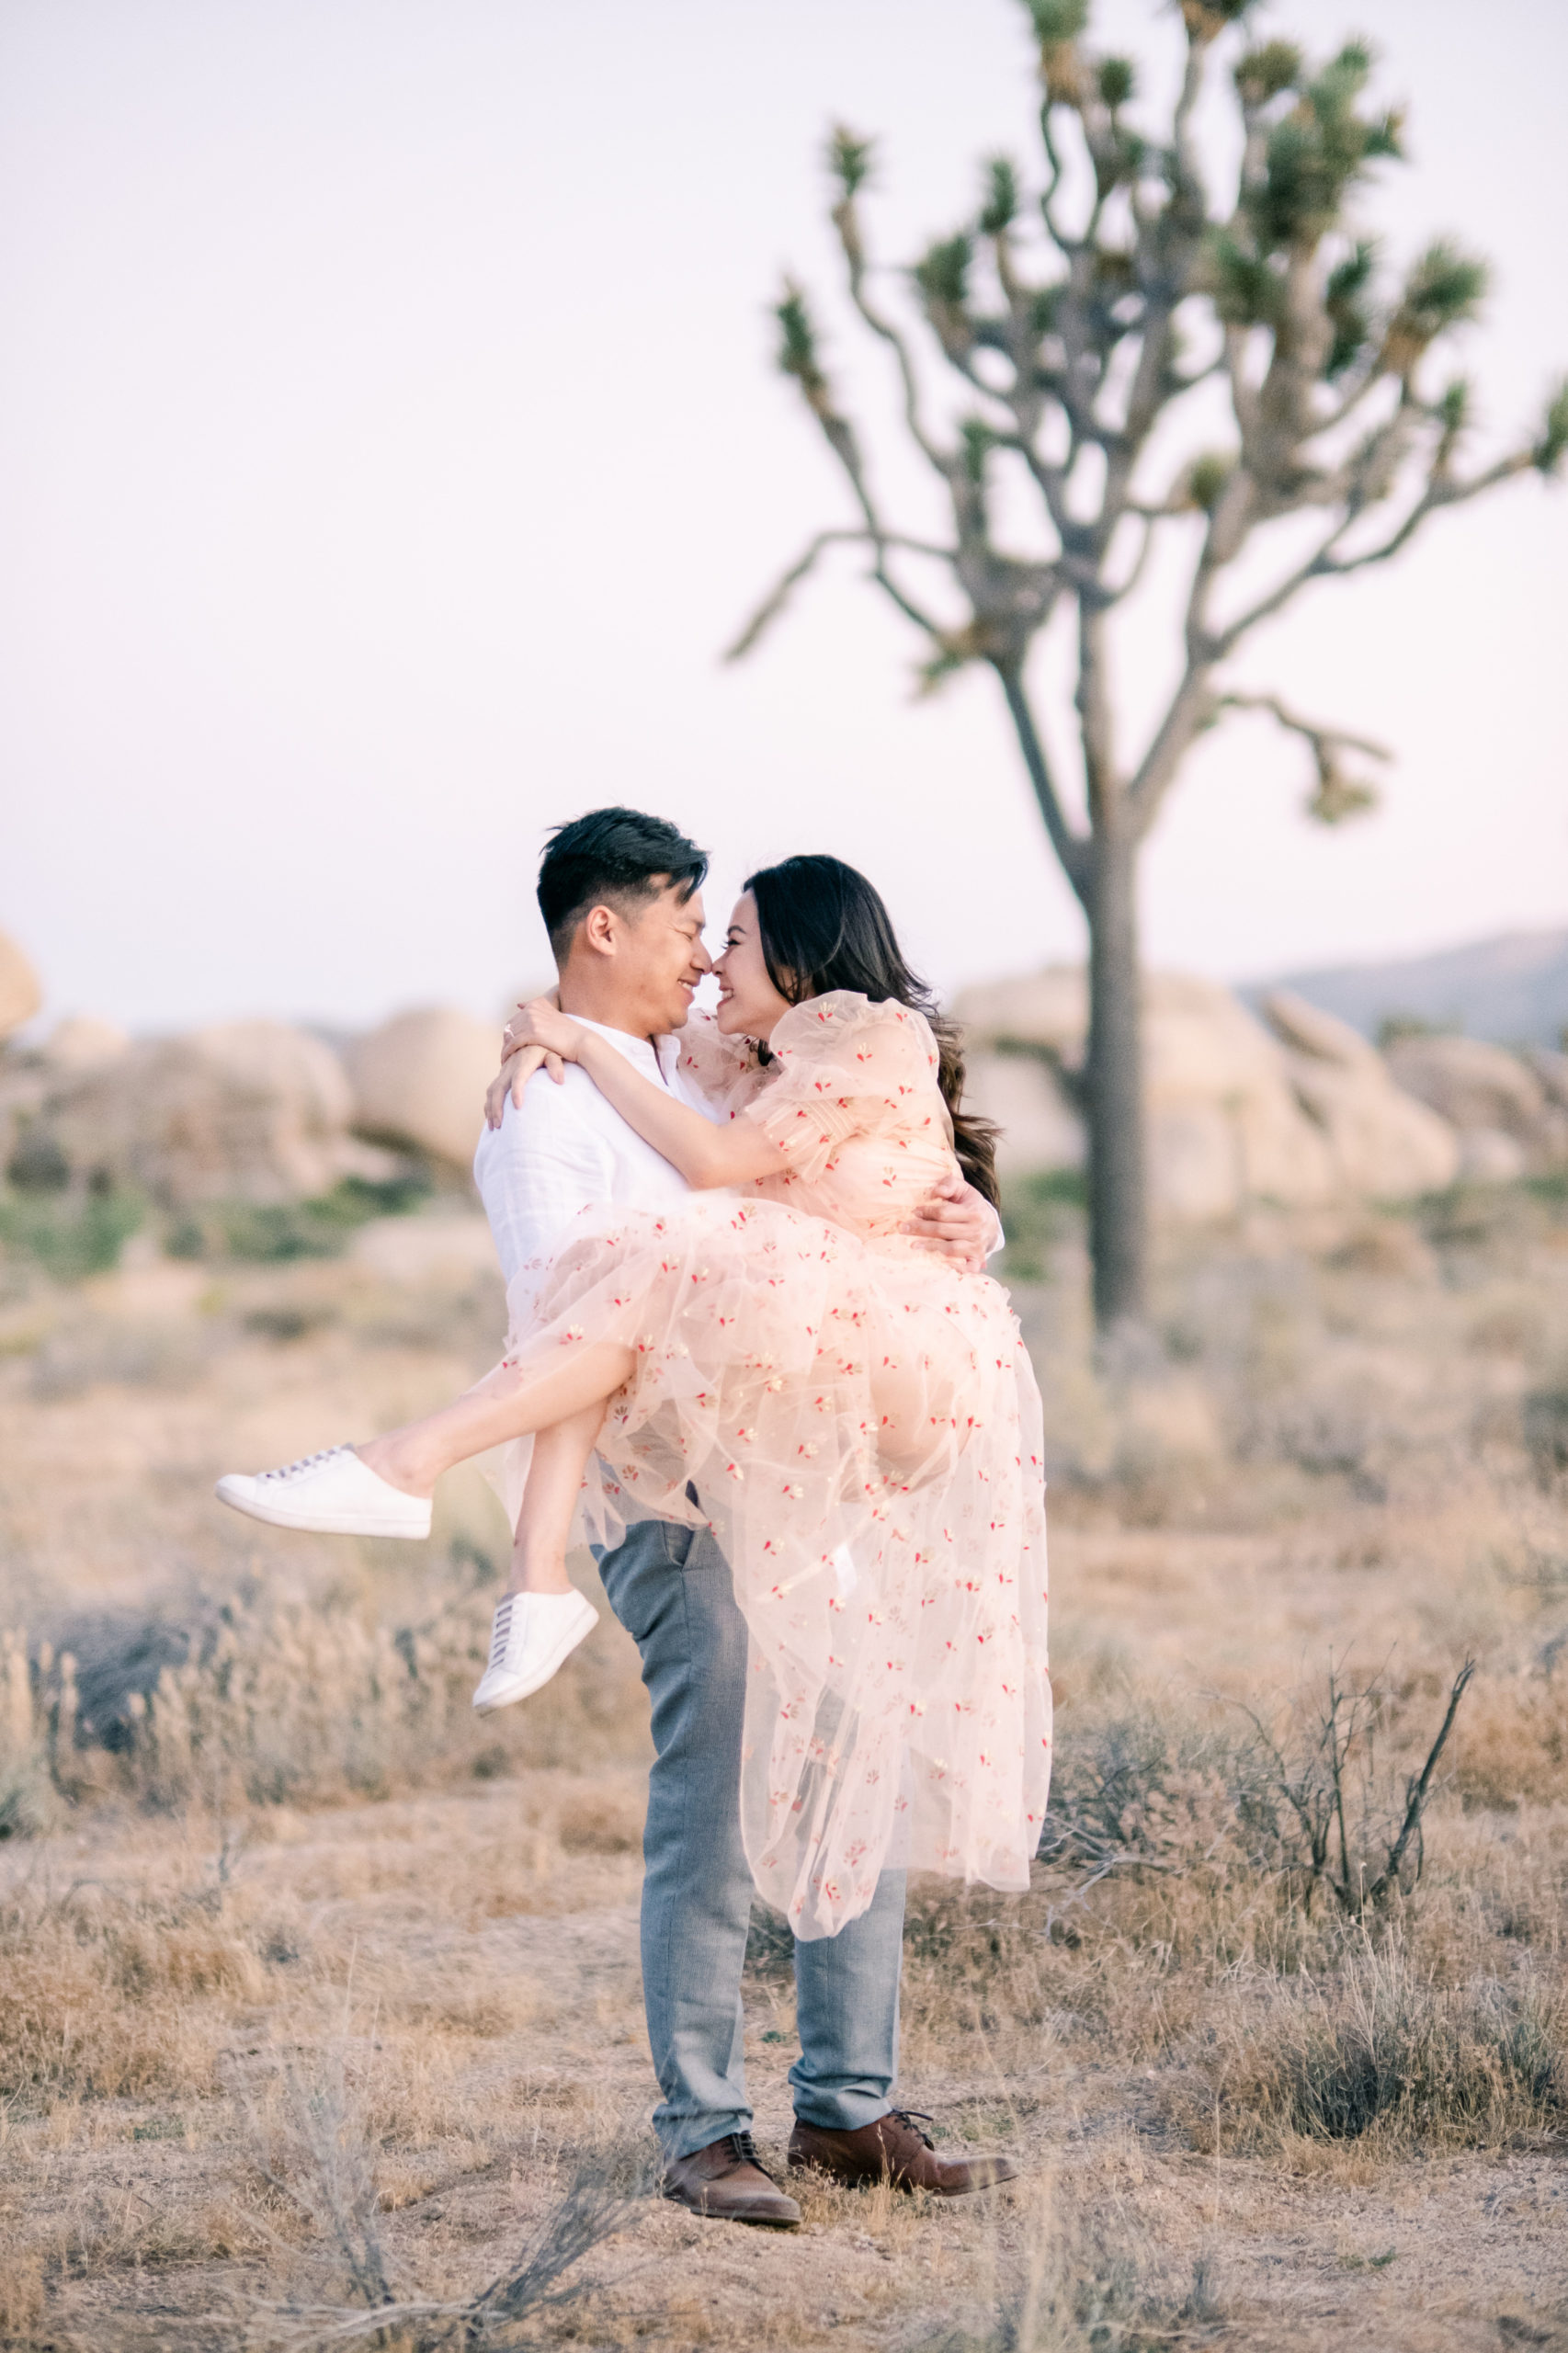 What are some good poses for couple photography? - Quora-gemektower.com.vn